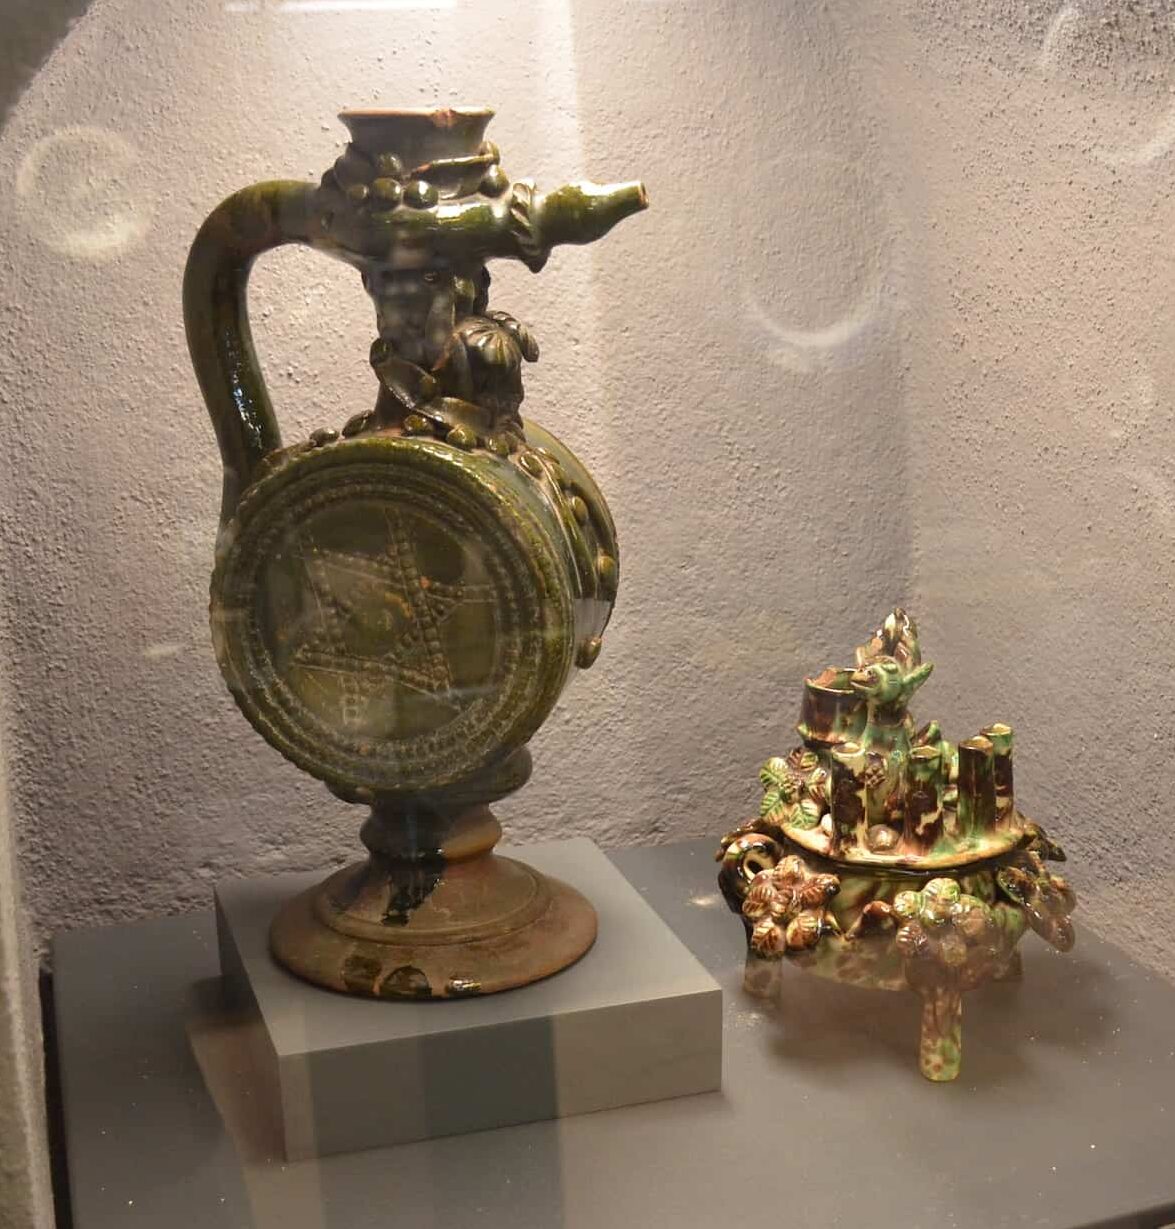 Çanakkale ceramic pitcher and sugar bowl, late 19th to early 20th century